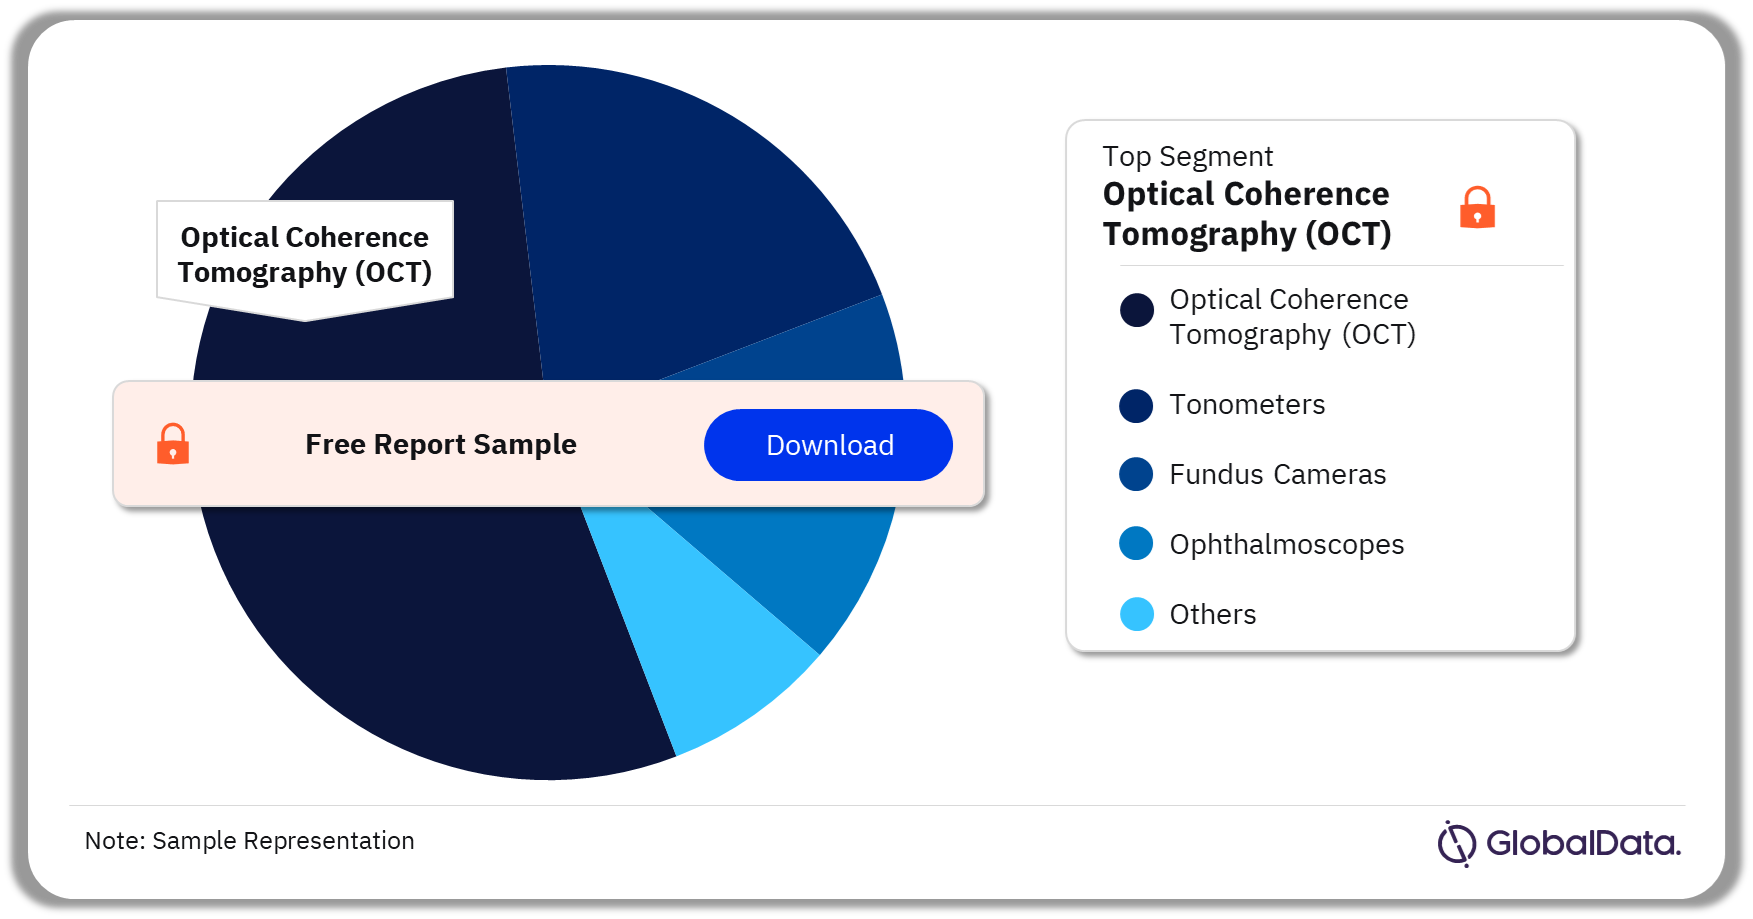 Ophthalmic Diagnostic Equipment Pipeline Market Analysis by Segments, 2023 (%)